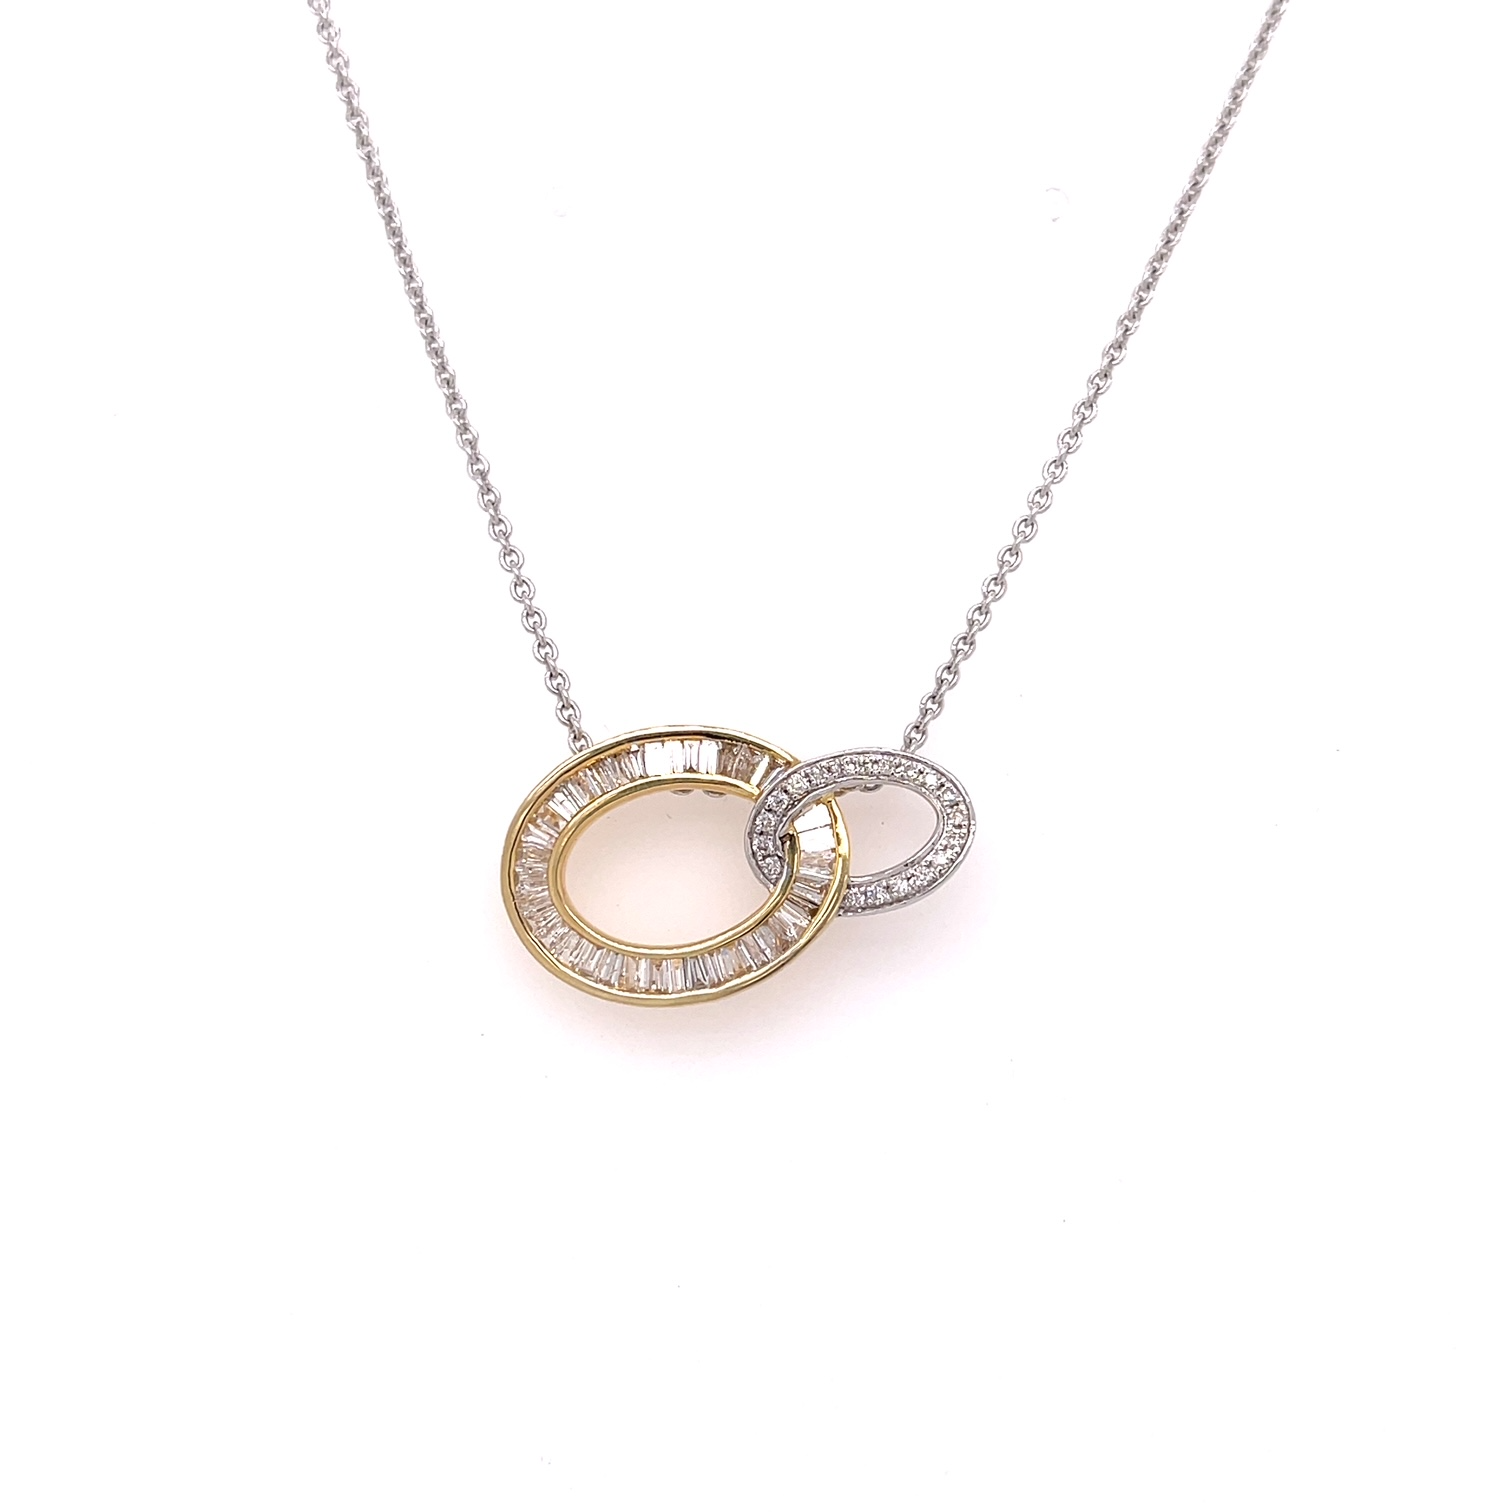 Add a bit of asymmetrical charm to your life with this lovely necklace!